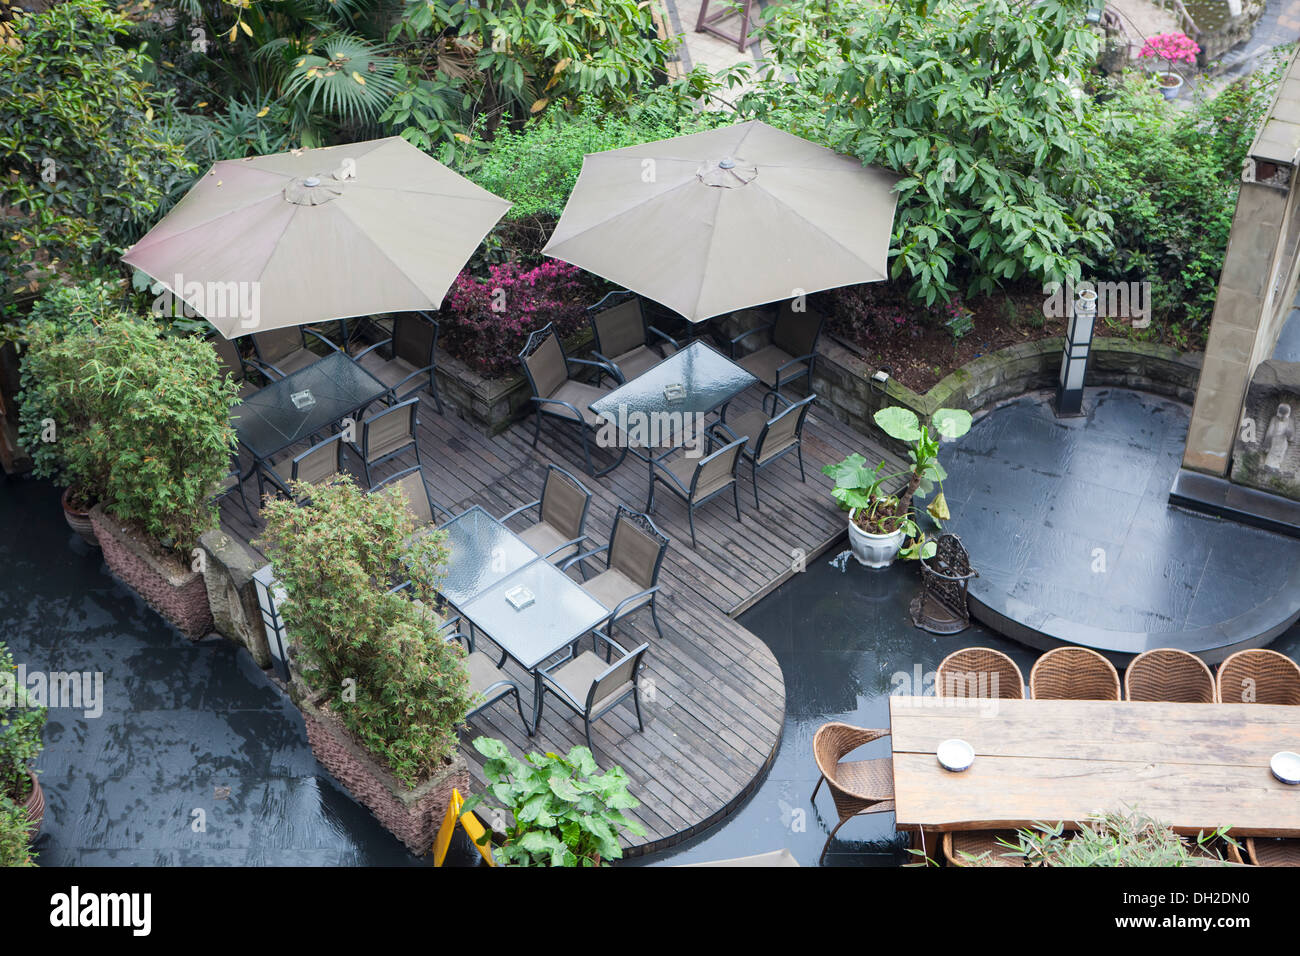 house patio with table and chairs under umbrella, there are a lot of vegetation around. Stock Photo